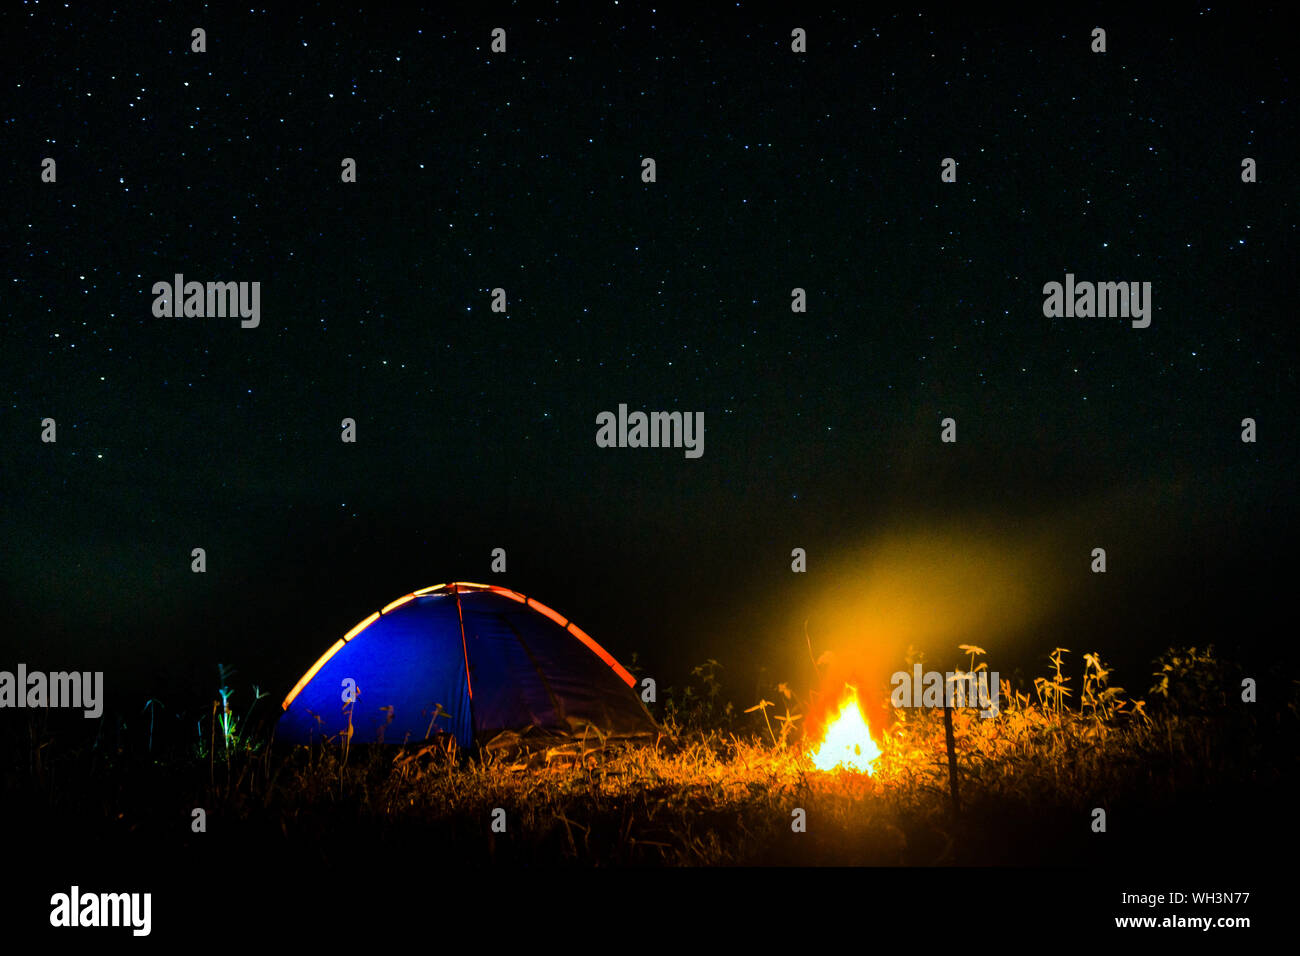 Illuminated Tent By Campfire Against Star Field At Night Stock Photo